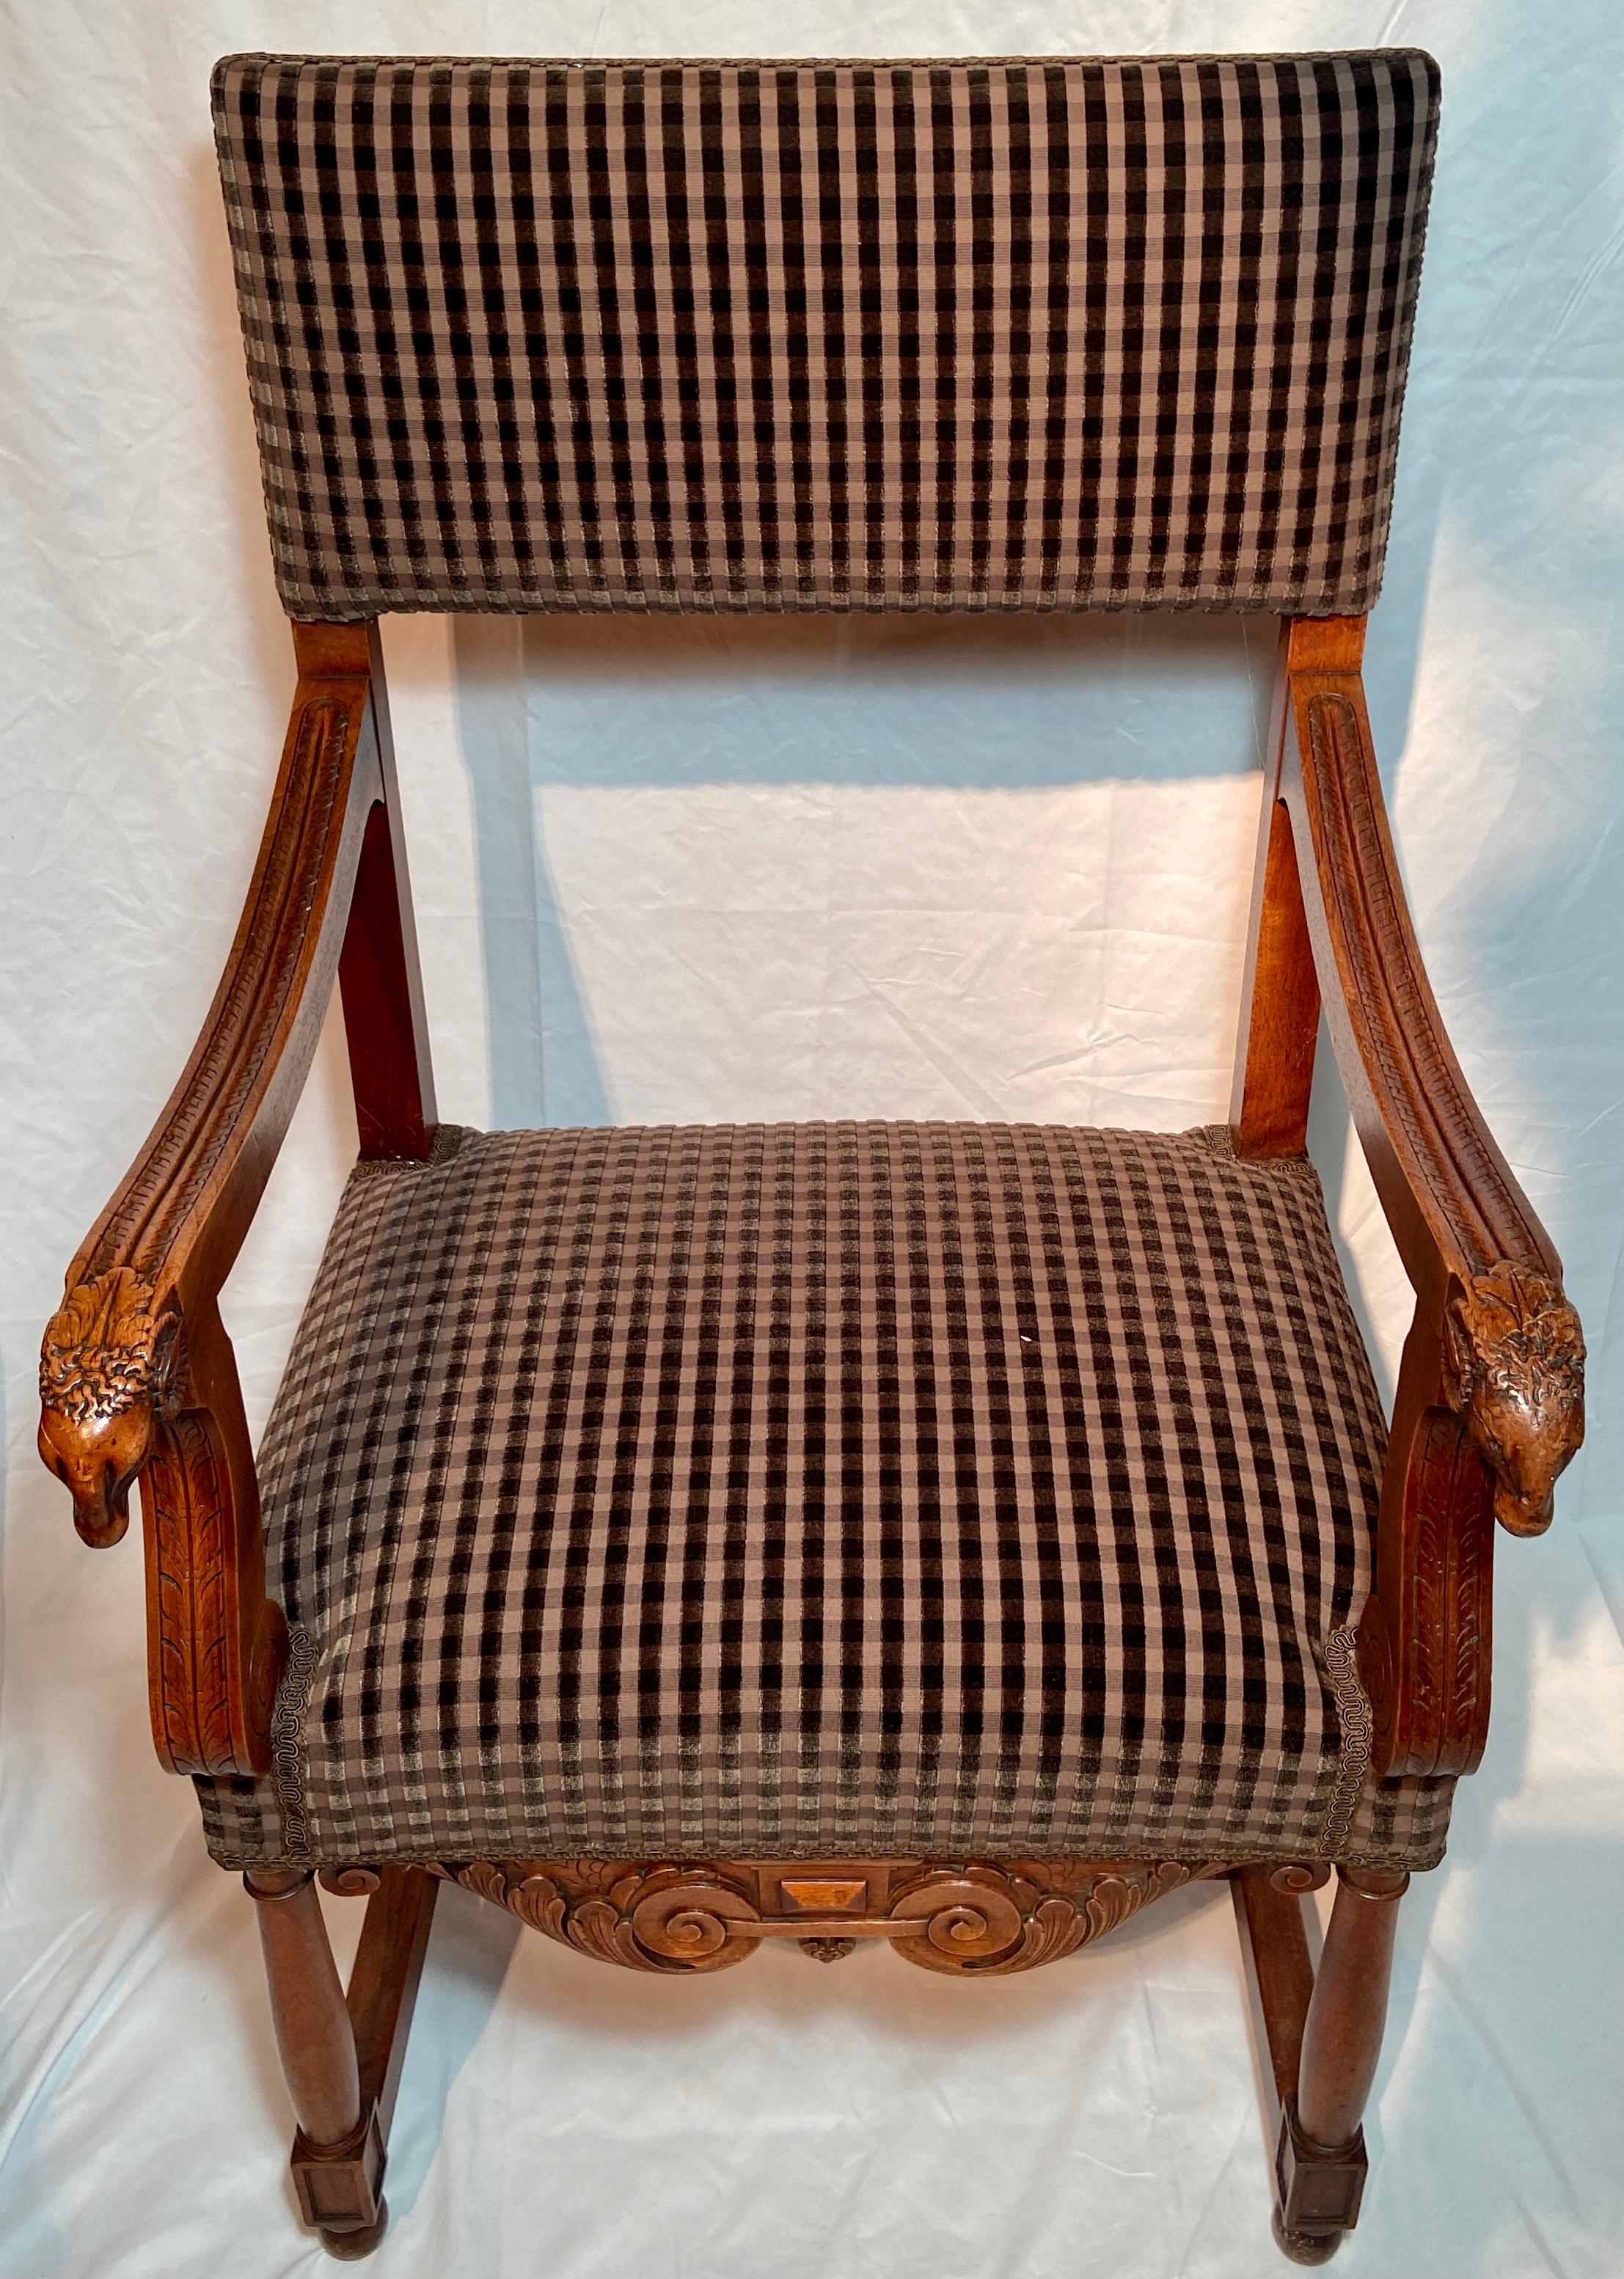 Pair Antique French Country Carved Walnut Arm Chairs, circa 1800s In Good Condition For Sale In New Orleans, LA